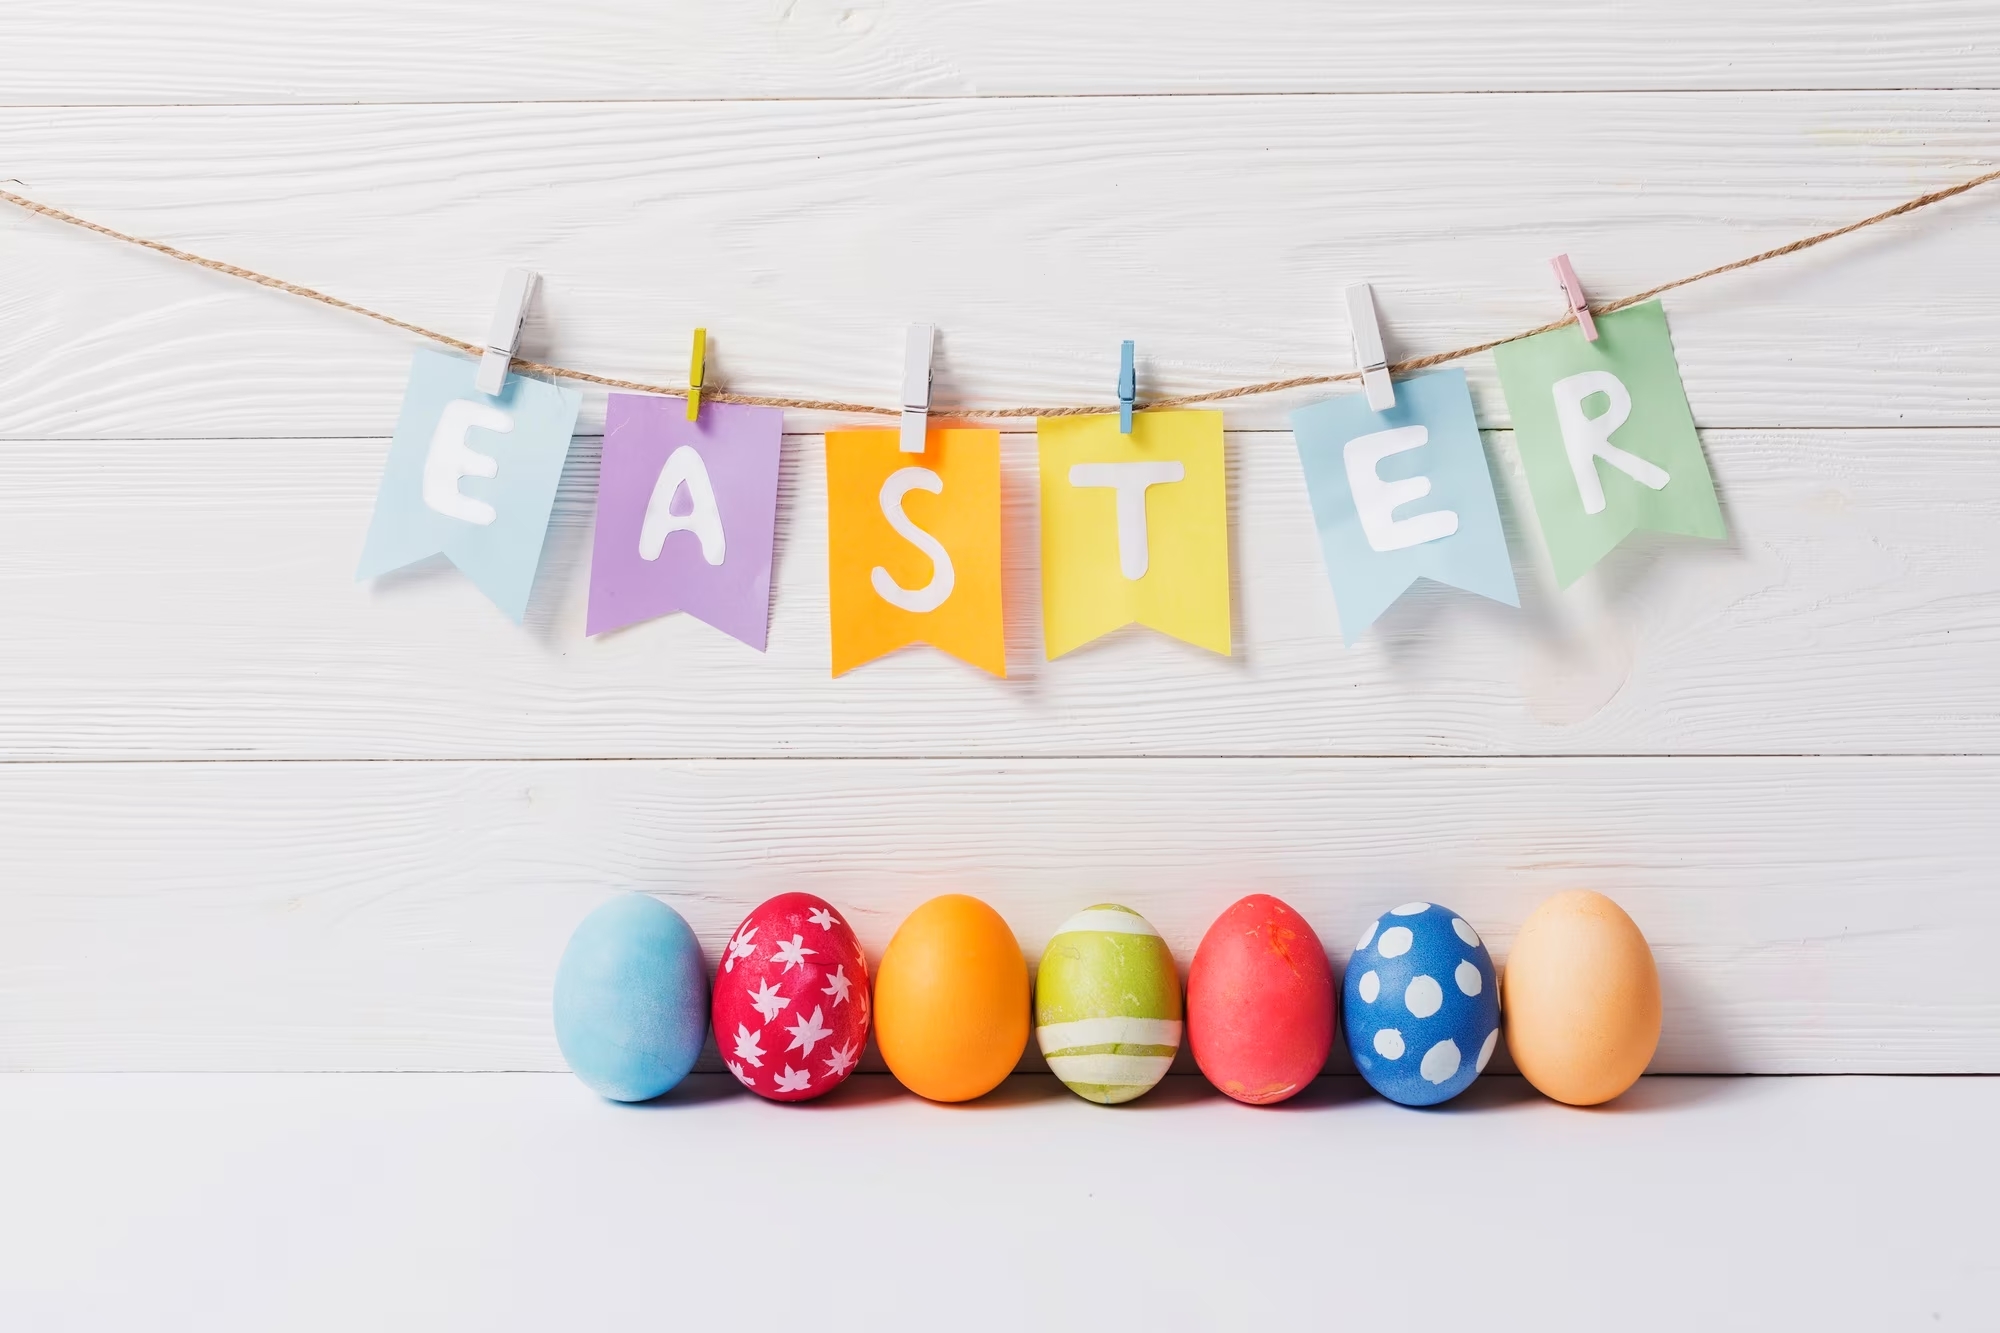 Fun Activities And Events You Can Do For Easter in Concord, NH